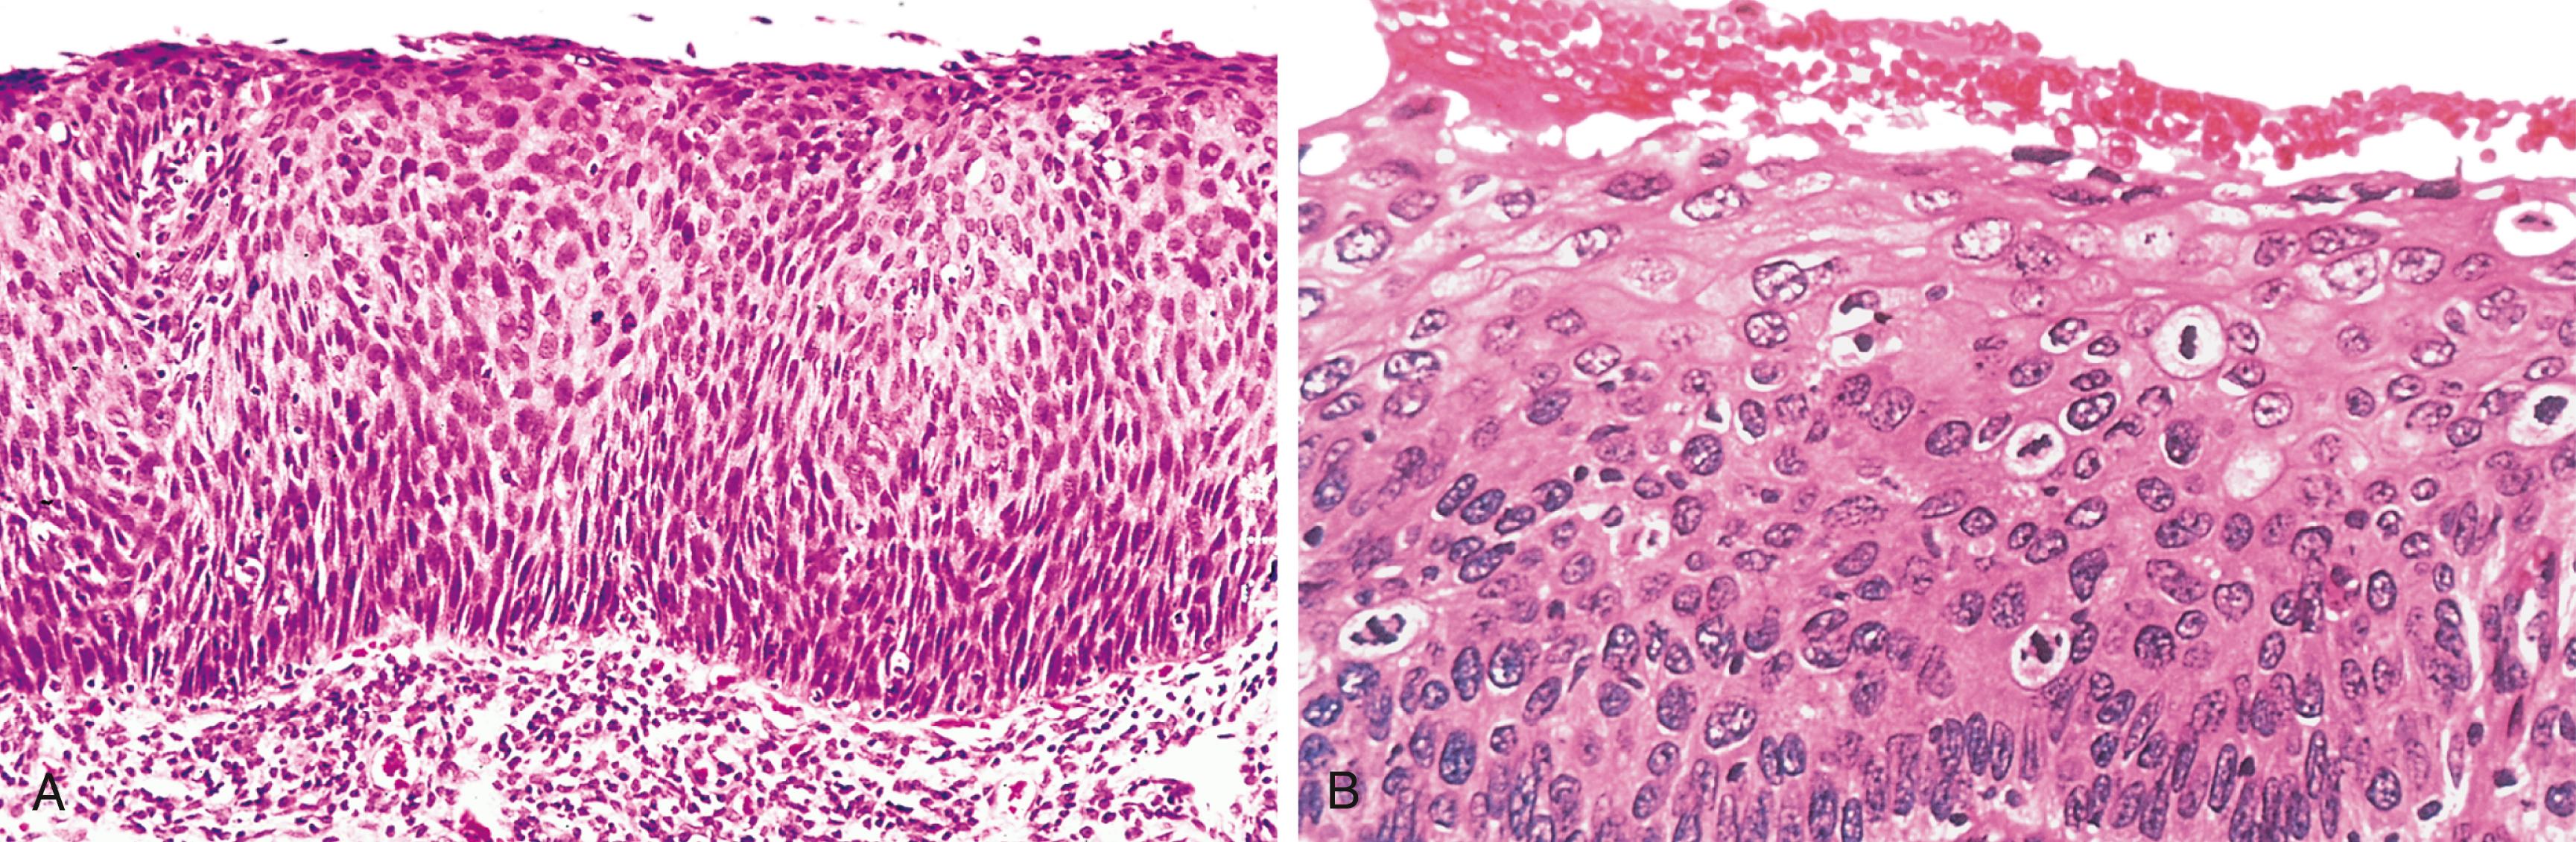 FIG. 6.6, Carcinoma in situ. (A) Low-power view shows that the entire thickness of the epithelium is replaced by atypical dysplastic cells. There is no orderly differentiation of squamous cells. The basement membrane is intact, and there is no tumor in the subepithelial stroma. (B) High-power view of another region shows failure of normal differentiation, marked nuclear and cellular pleomorphism, and numerous mitotic figures extending toward the surface. The intact basement membrane (below) is not seen in this section.